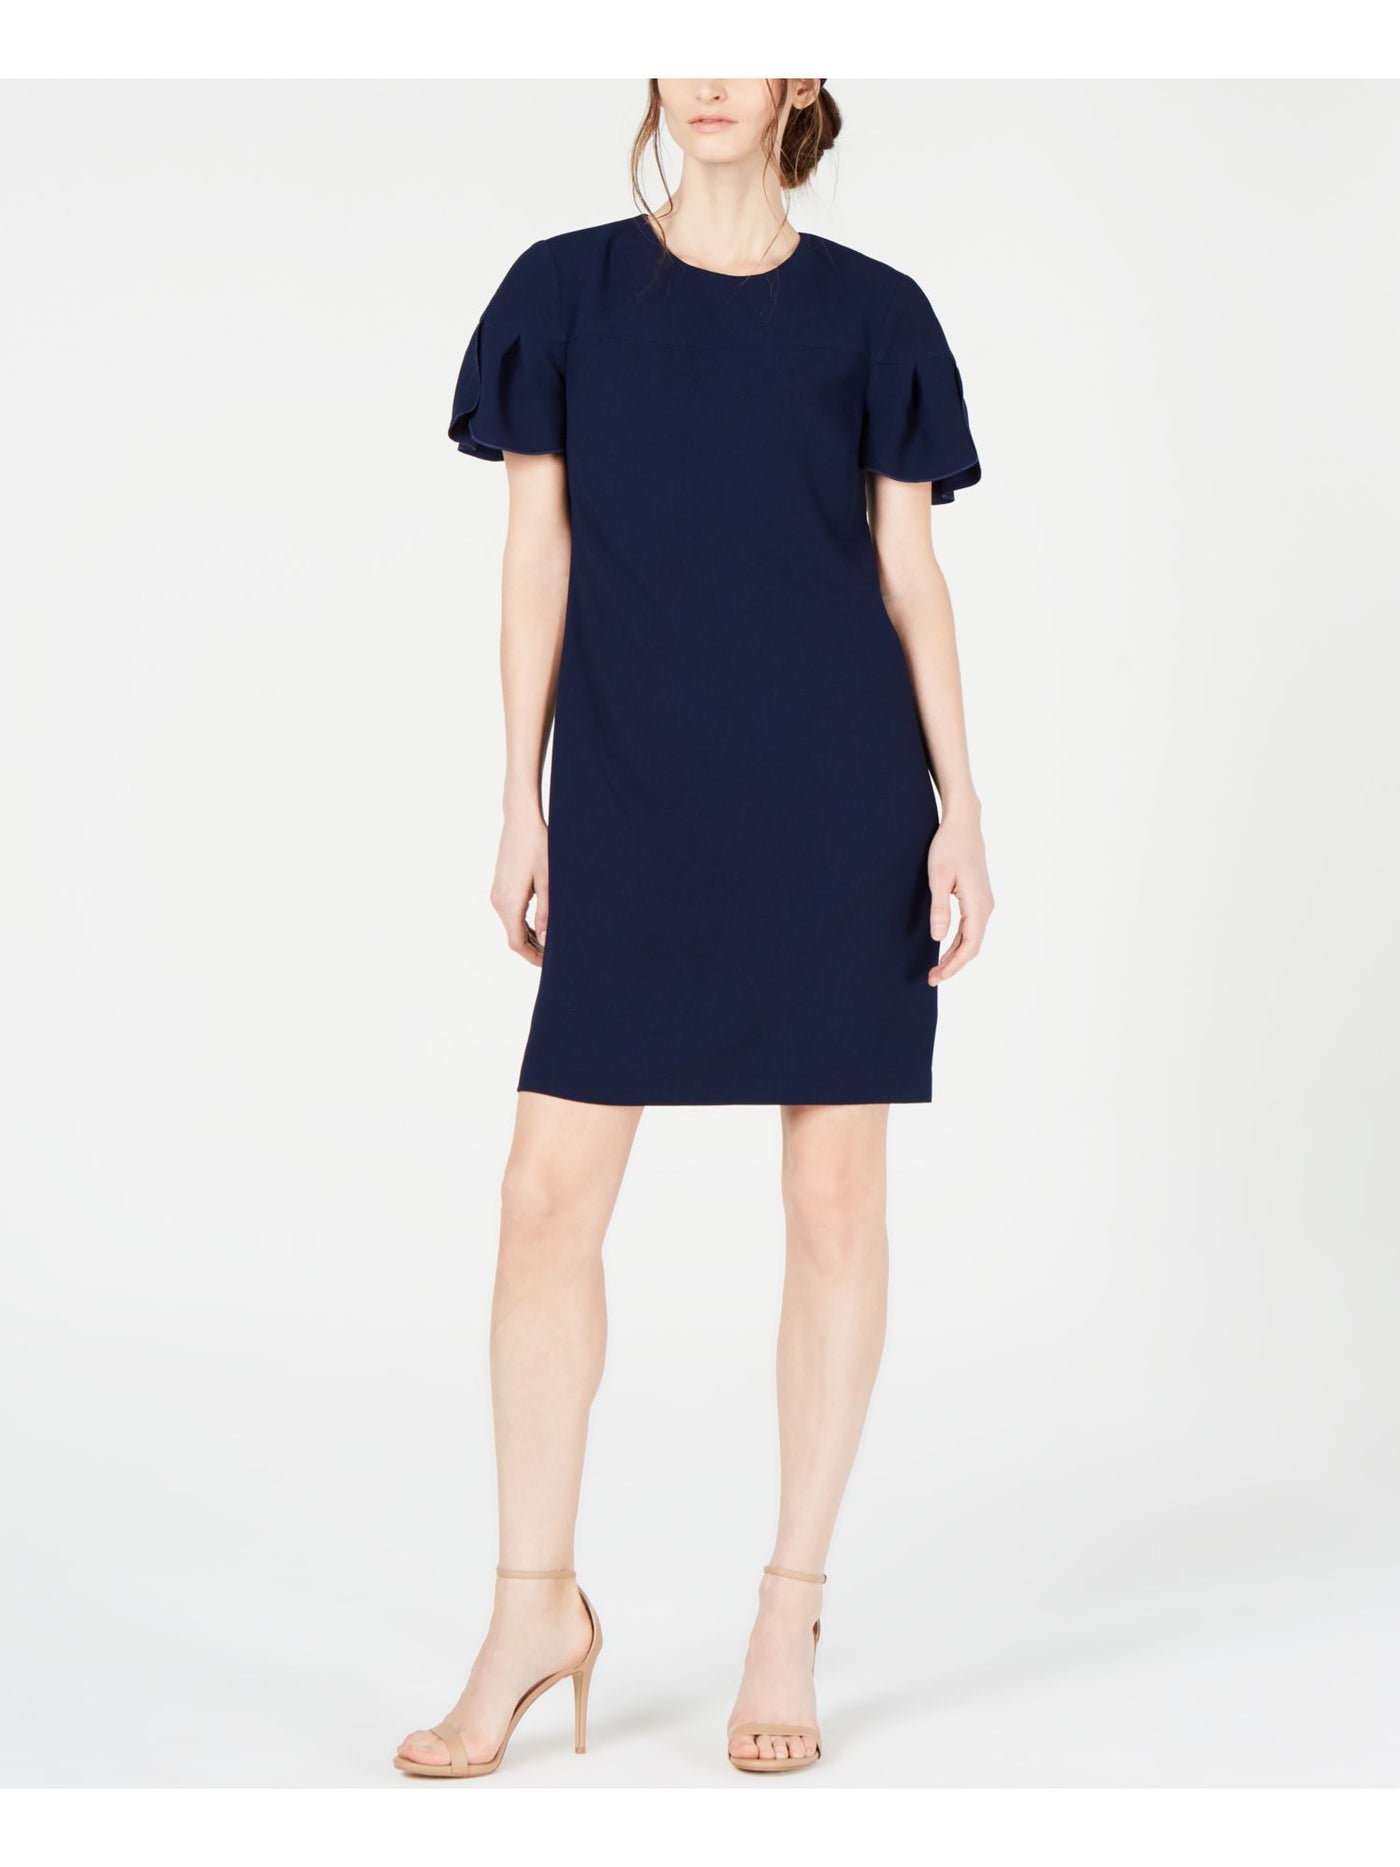 TRINA TURK Womens Crew Neck Above The Knee Party Shift Dress